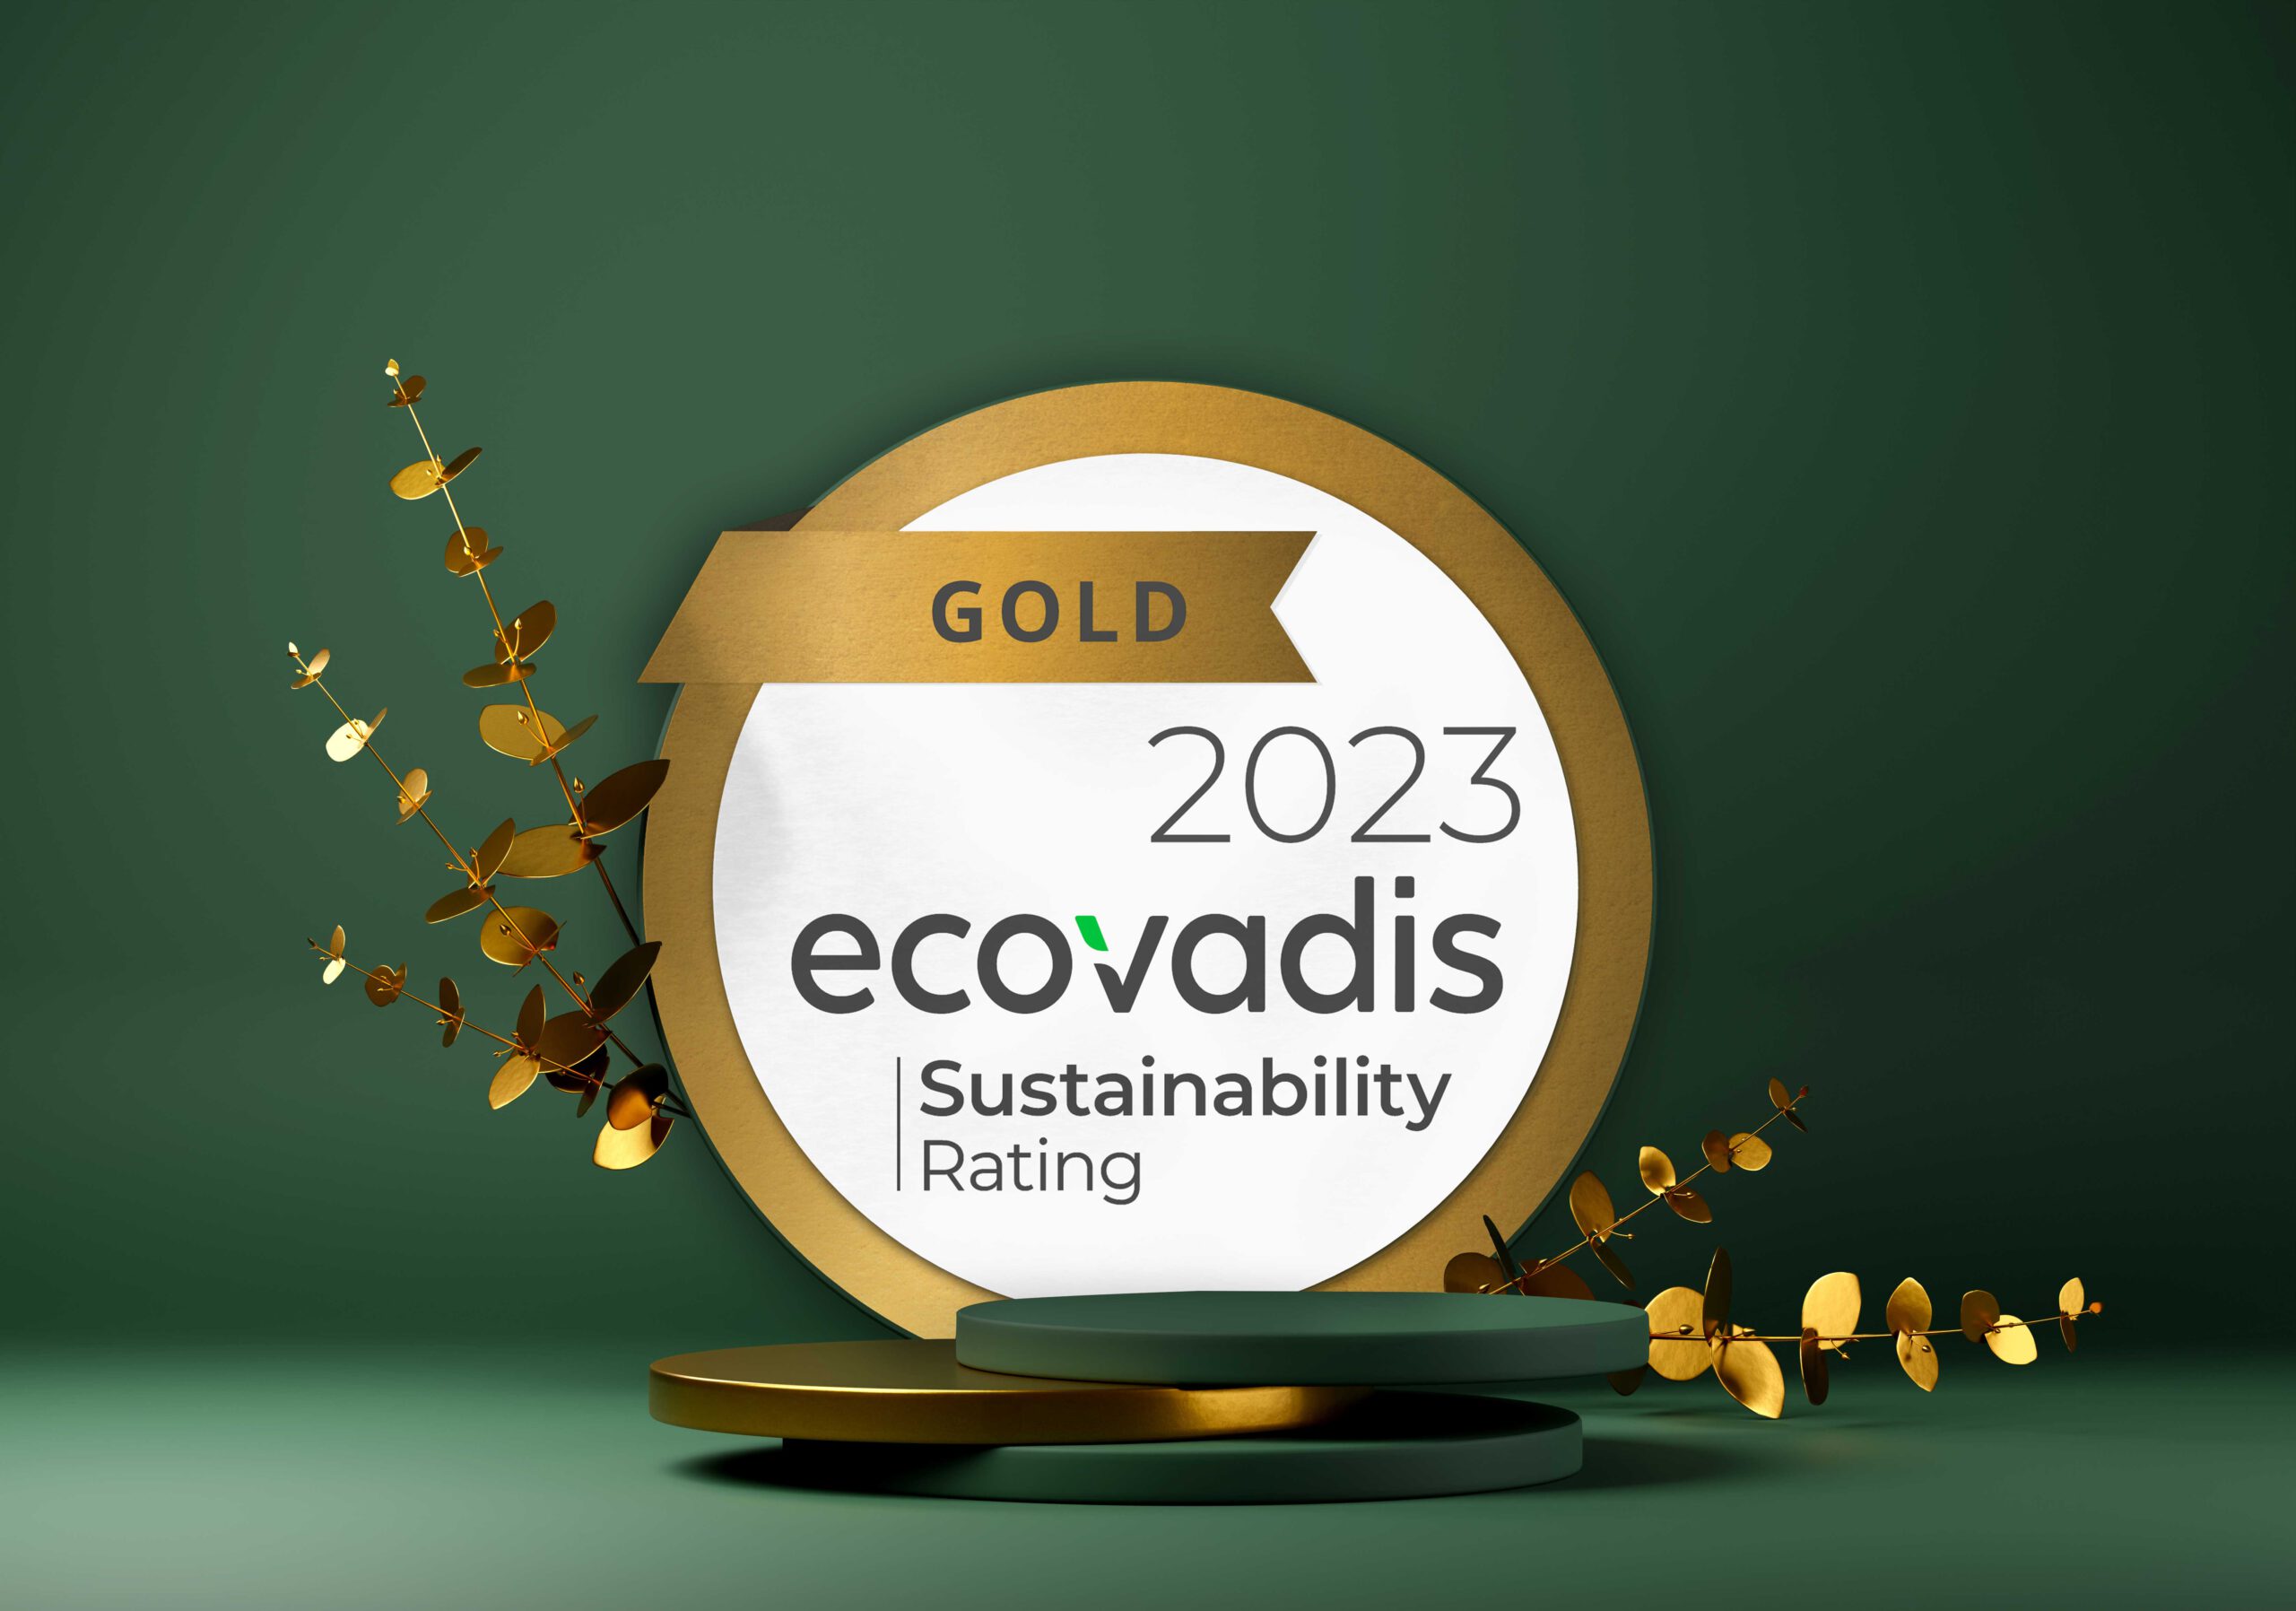 deSter holds EcoVadis Gold rating in 2023